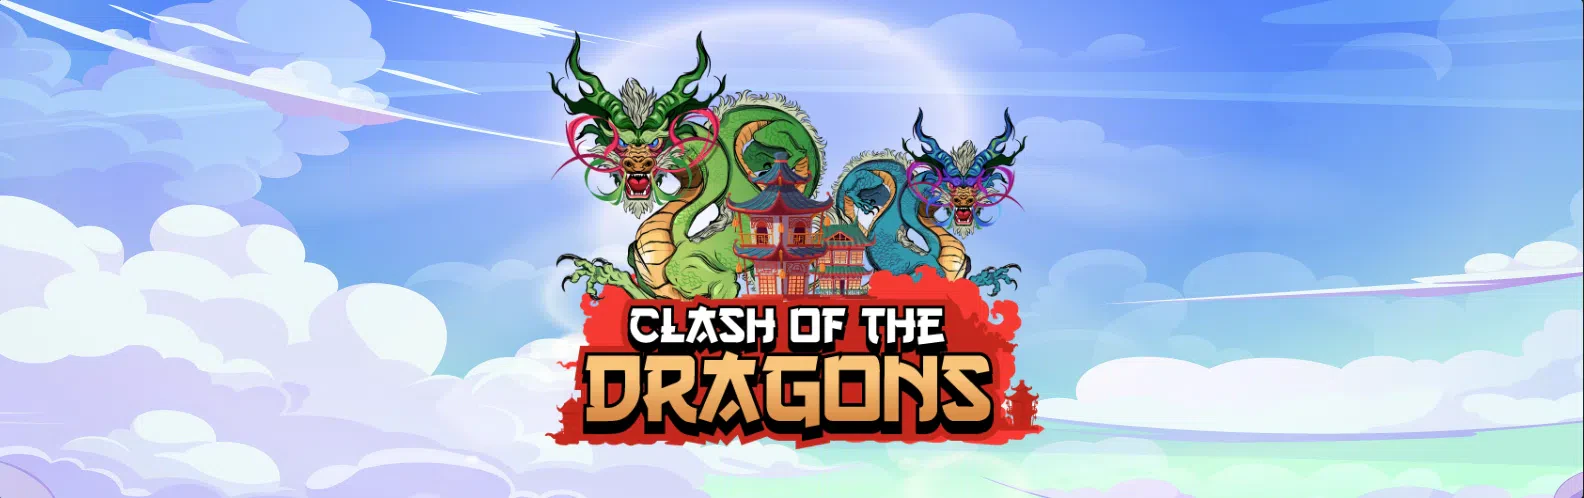 Promotion Clash of the dragons